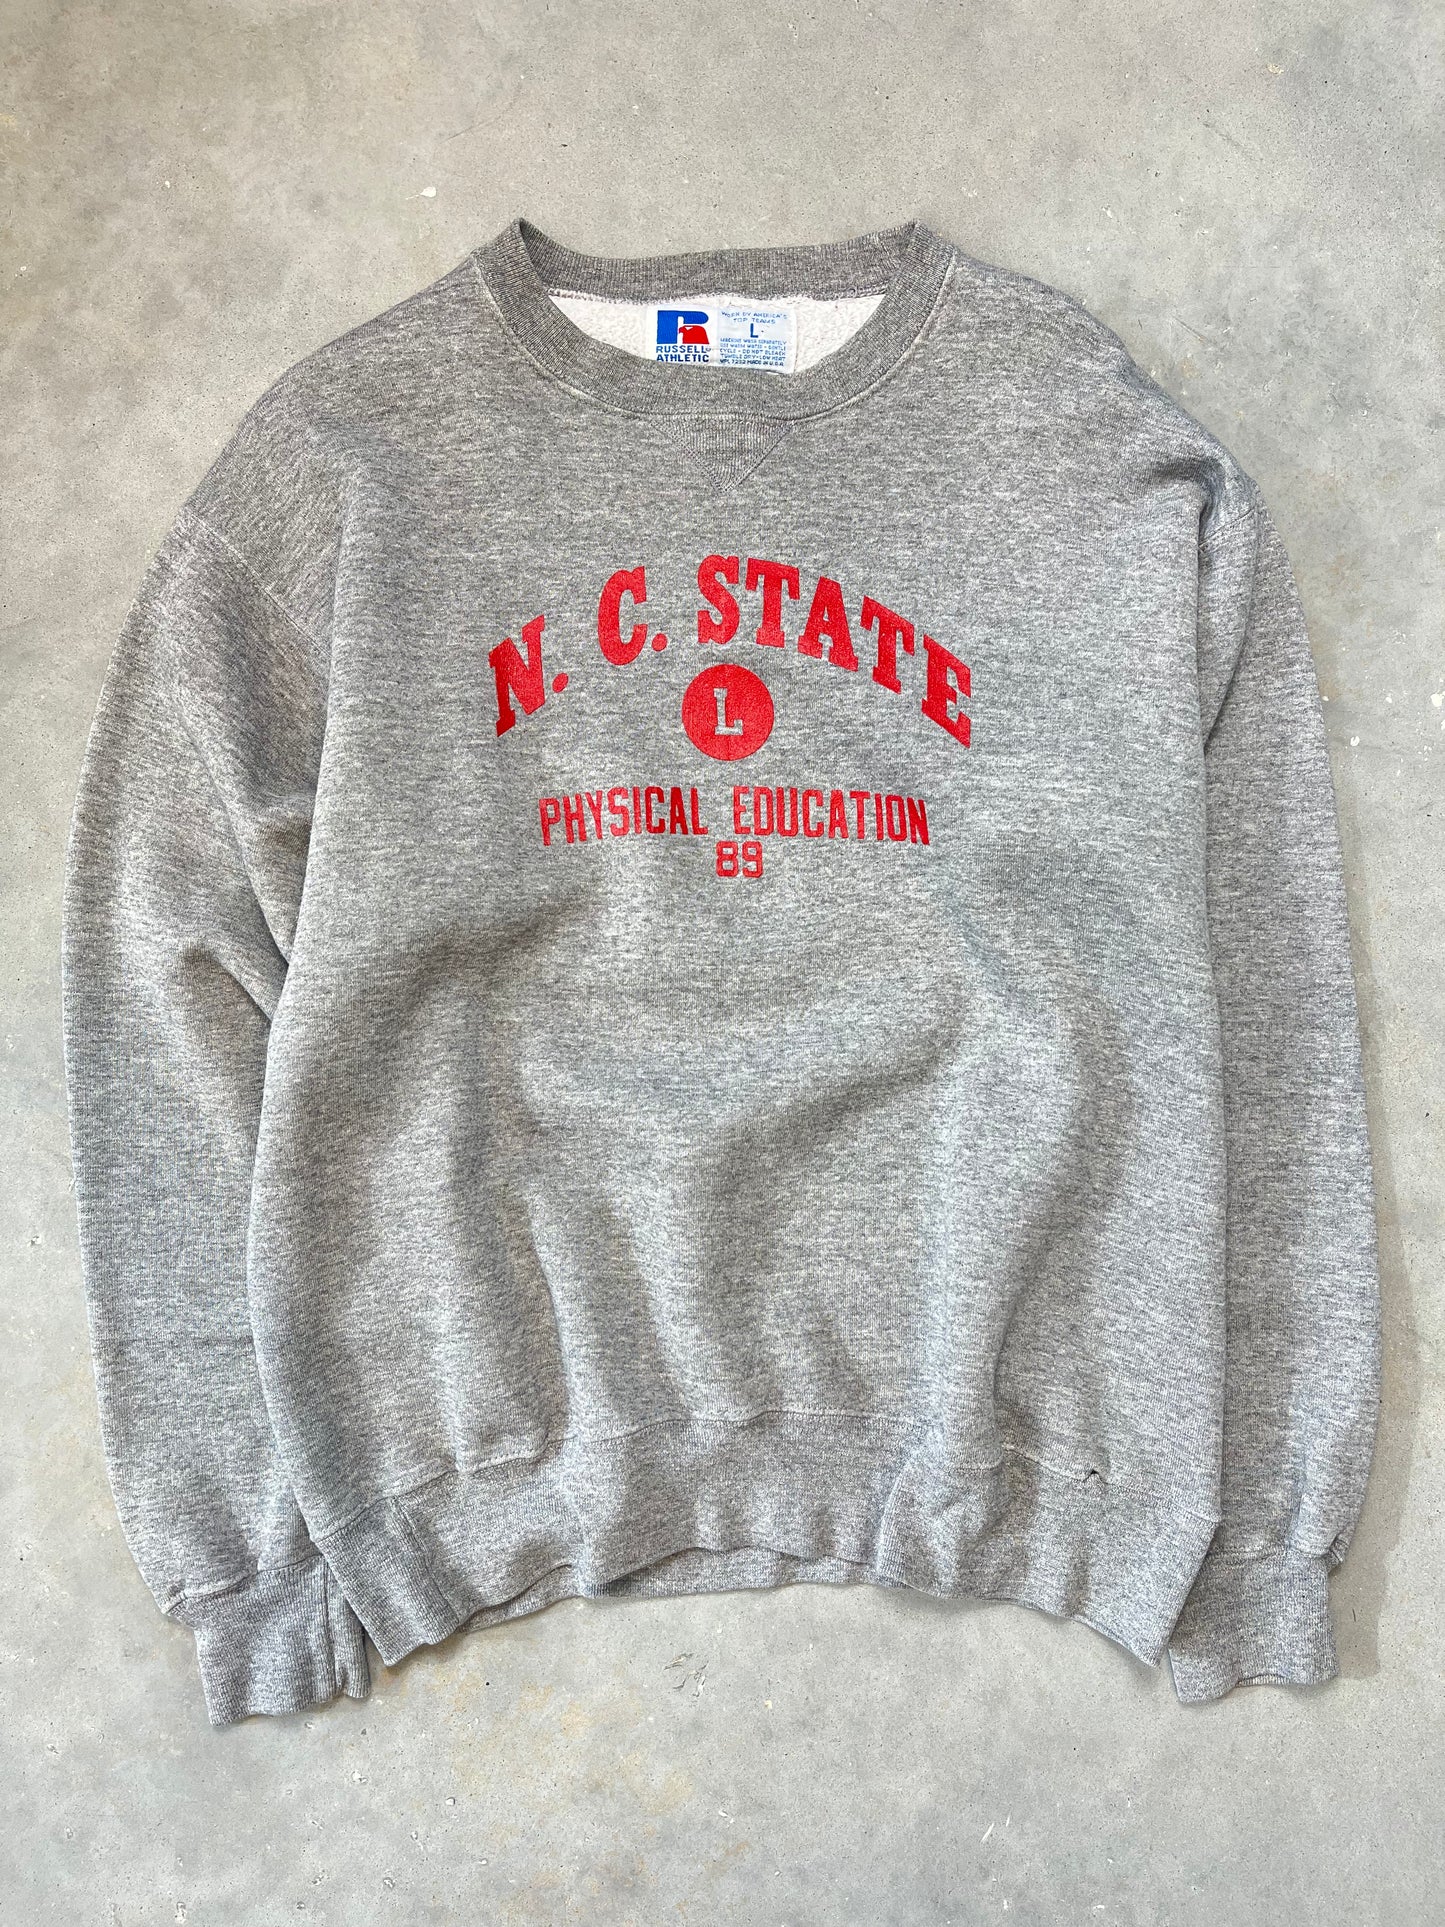 1989 NC State Wolfpack Physical Education Vintage Russell Athletic Crewneck (Large)